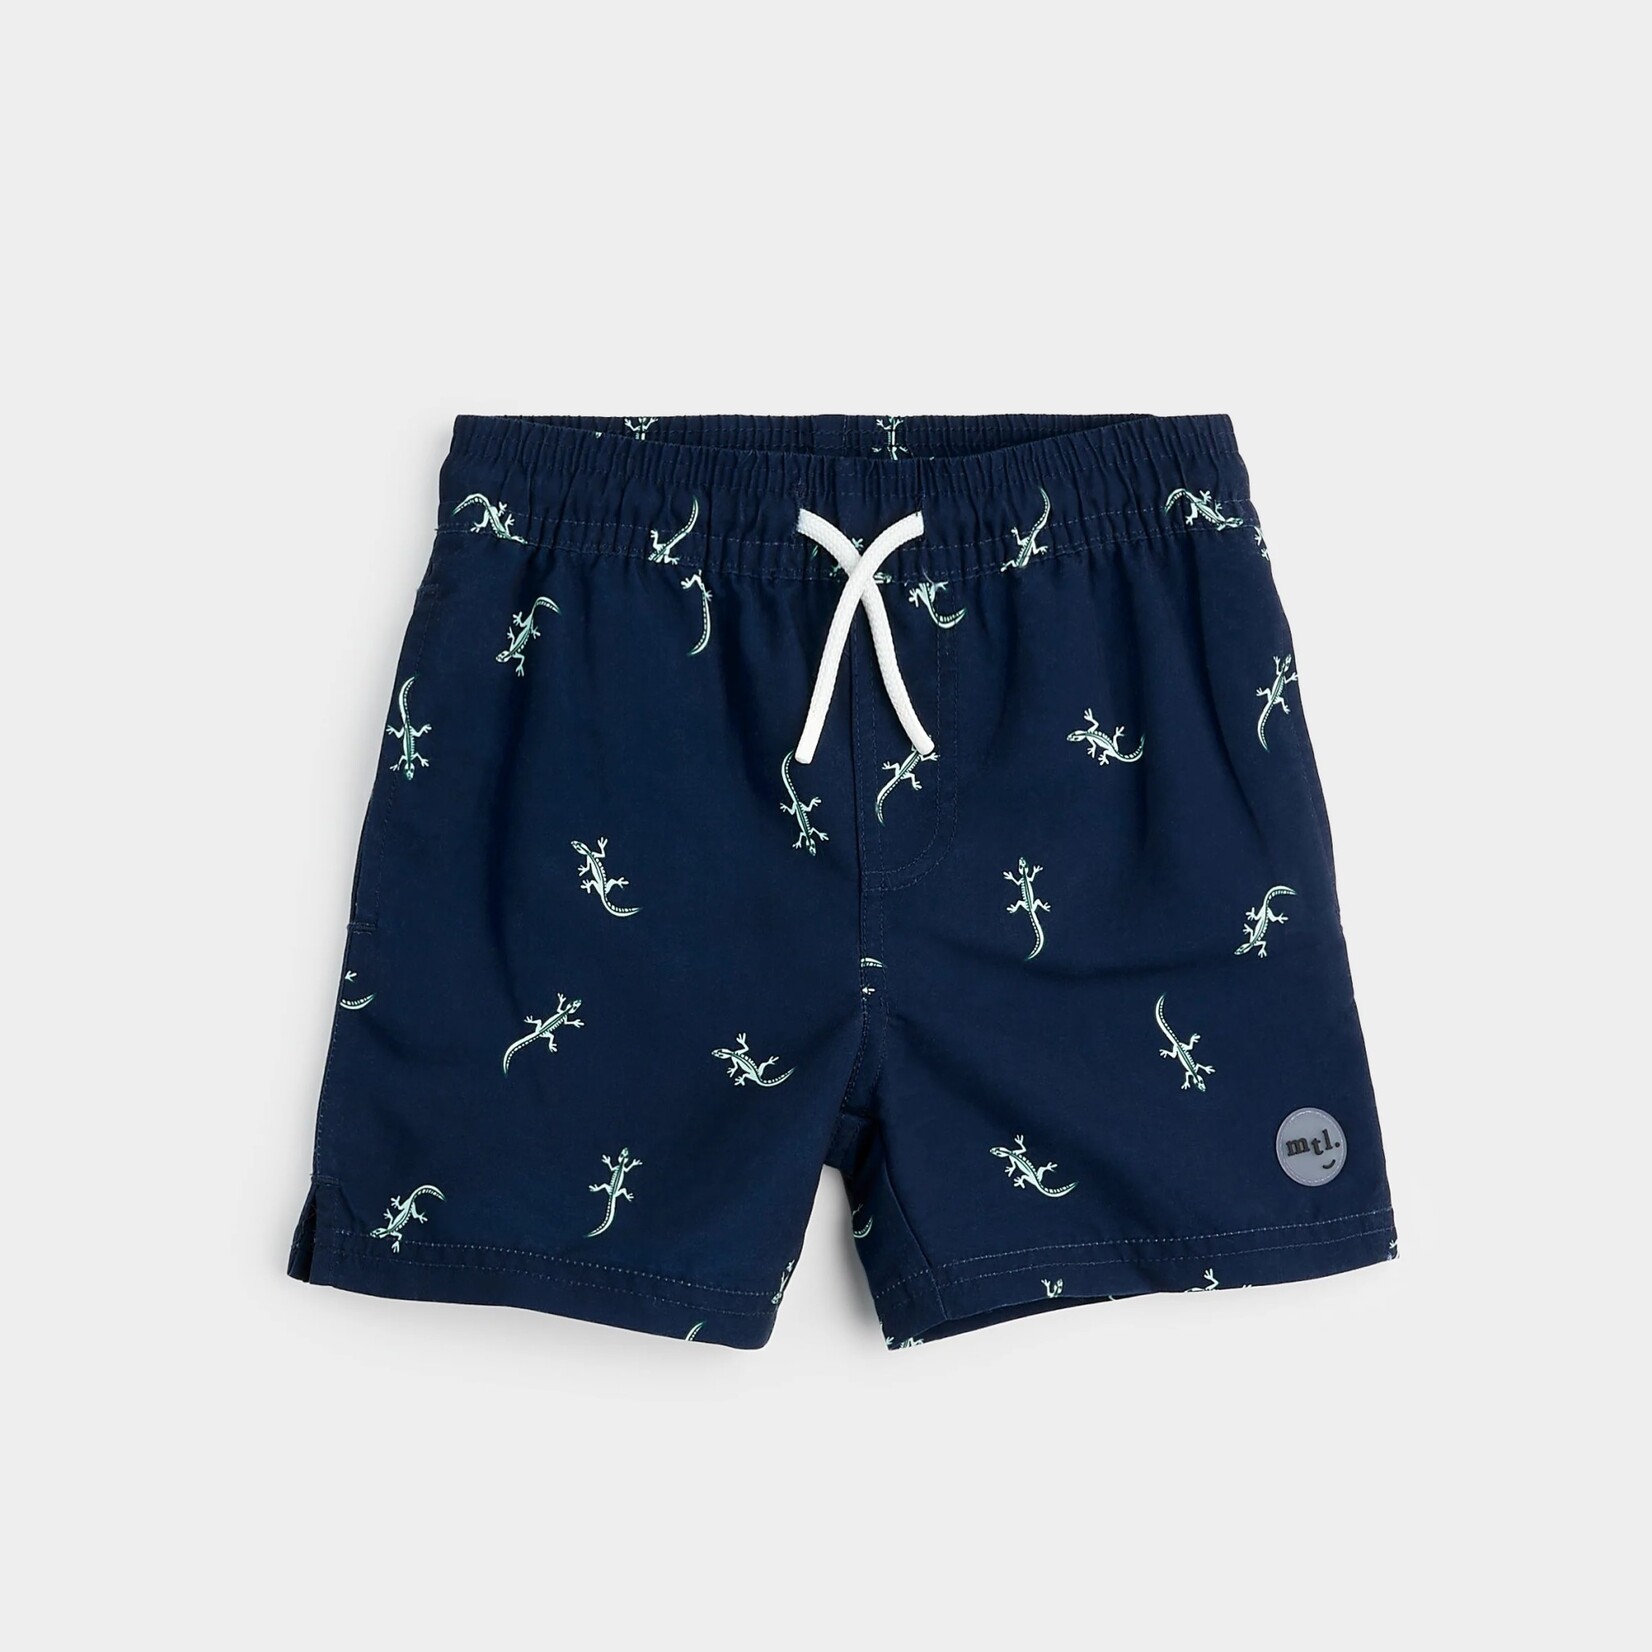 Miles the label MILES THE LABEL- Navy Boardshort Swimsuit with Gecko Print